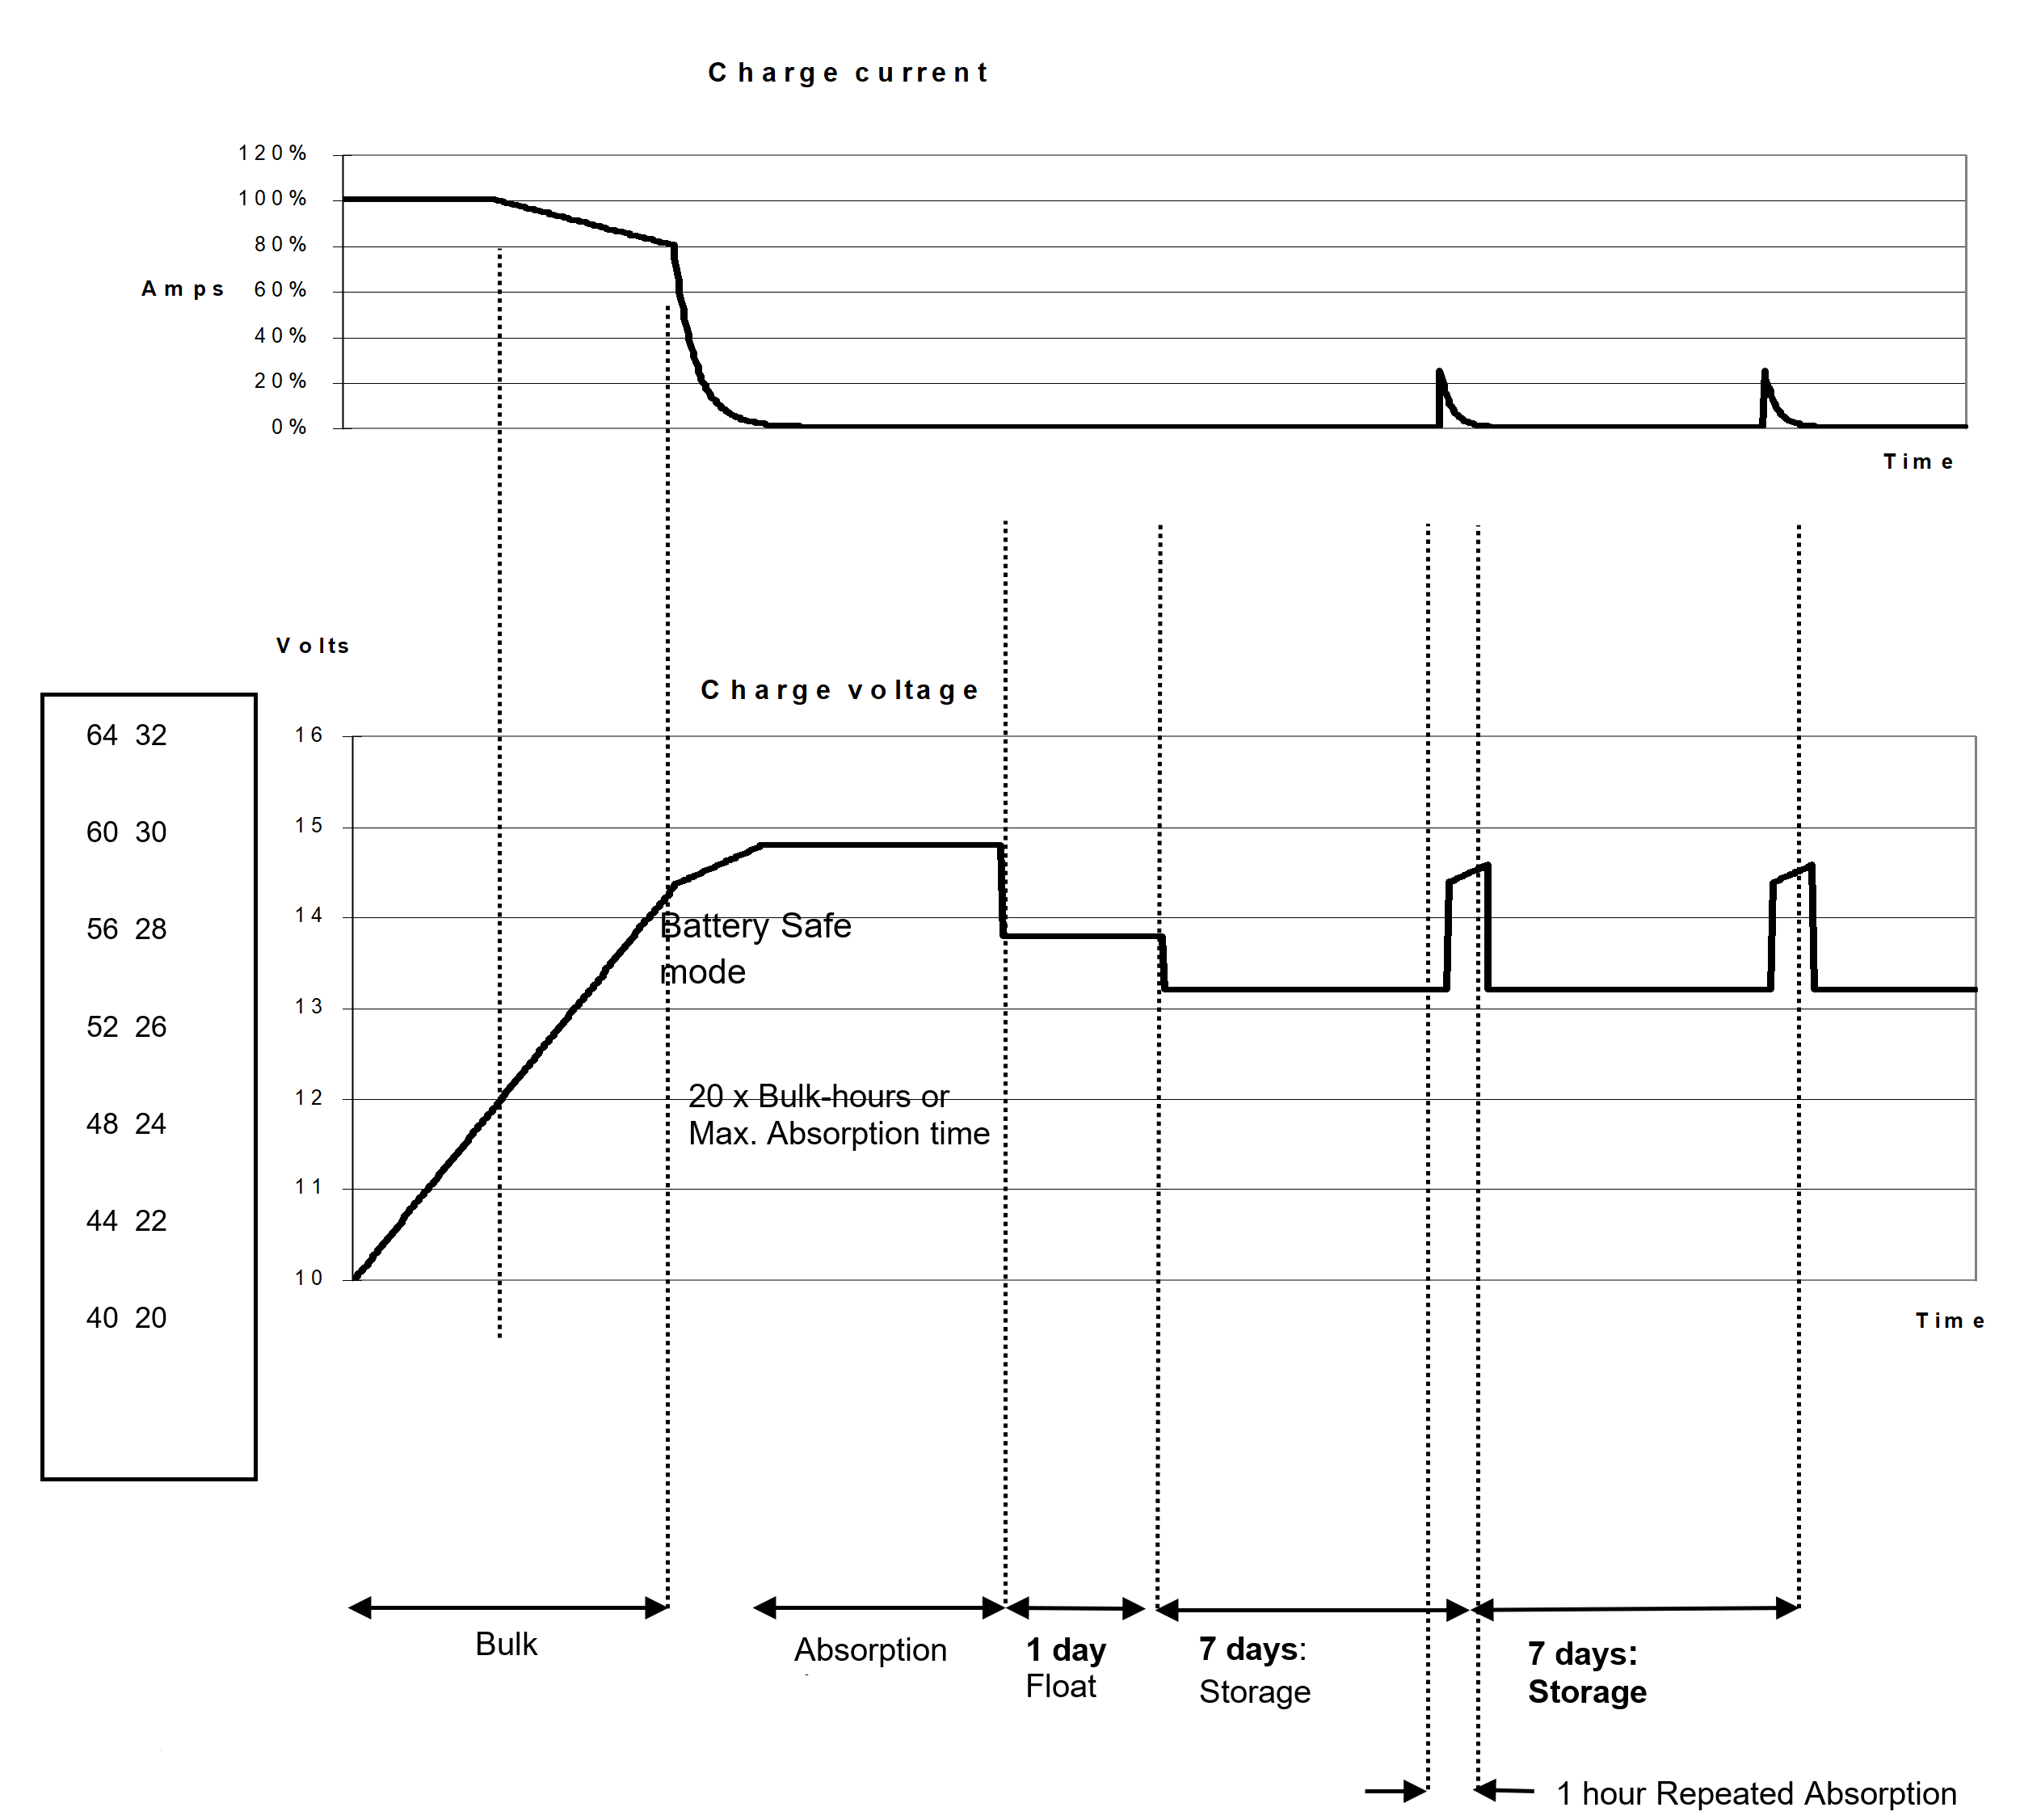 MP_500VA_-_Charge_graph.PNG